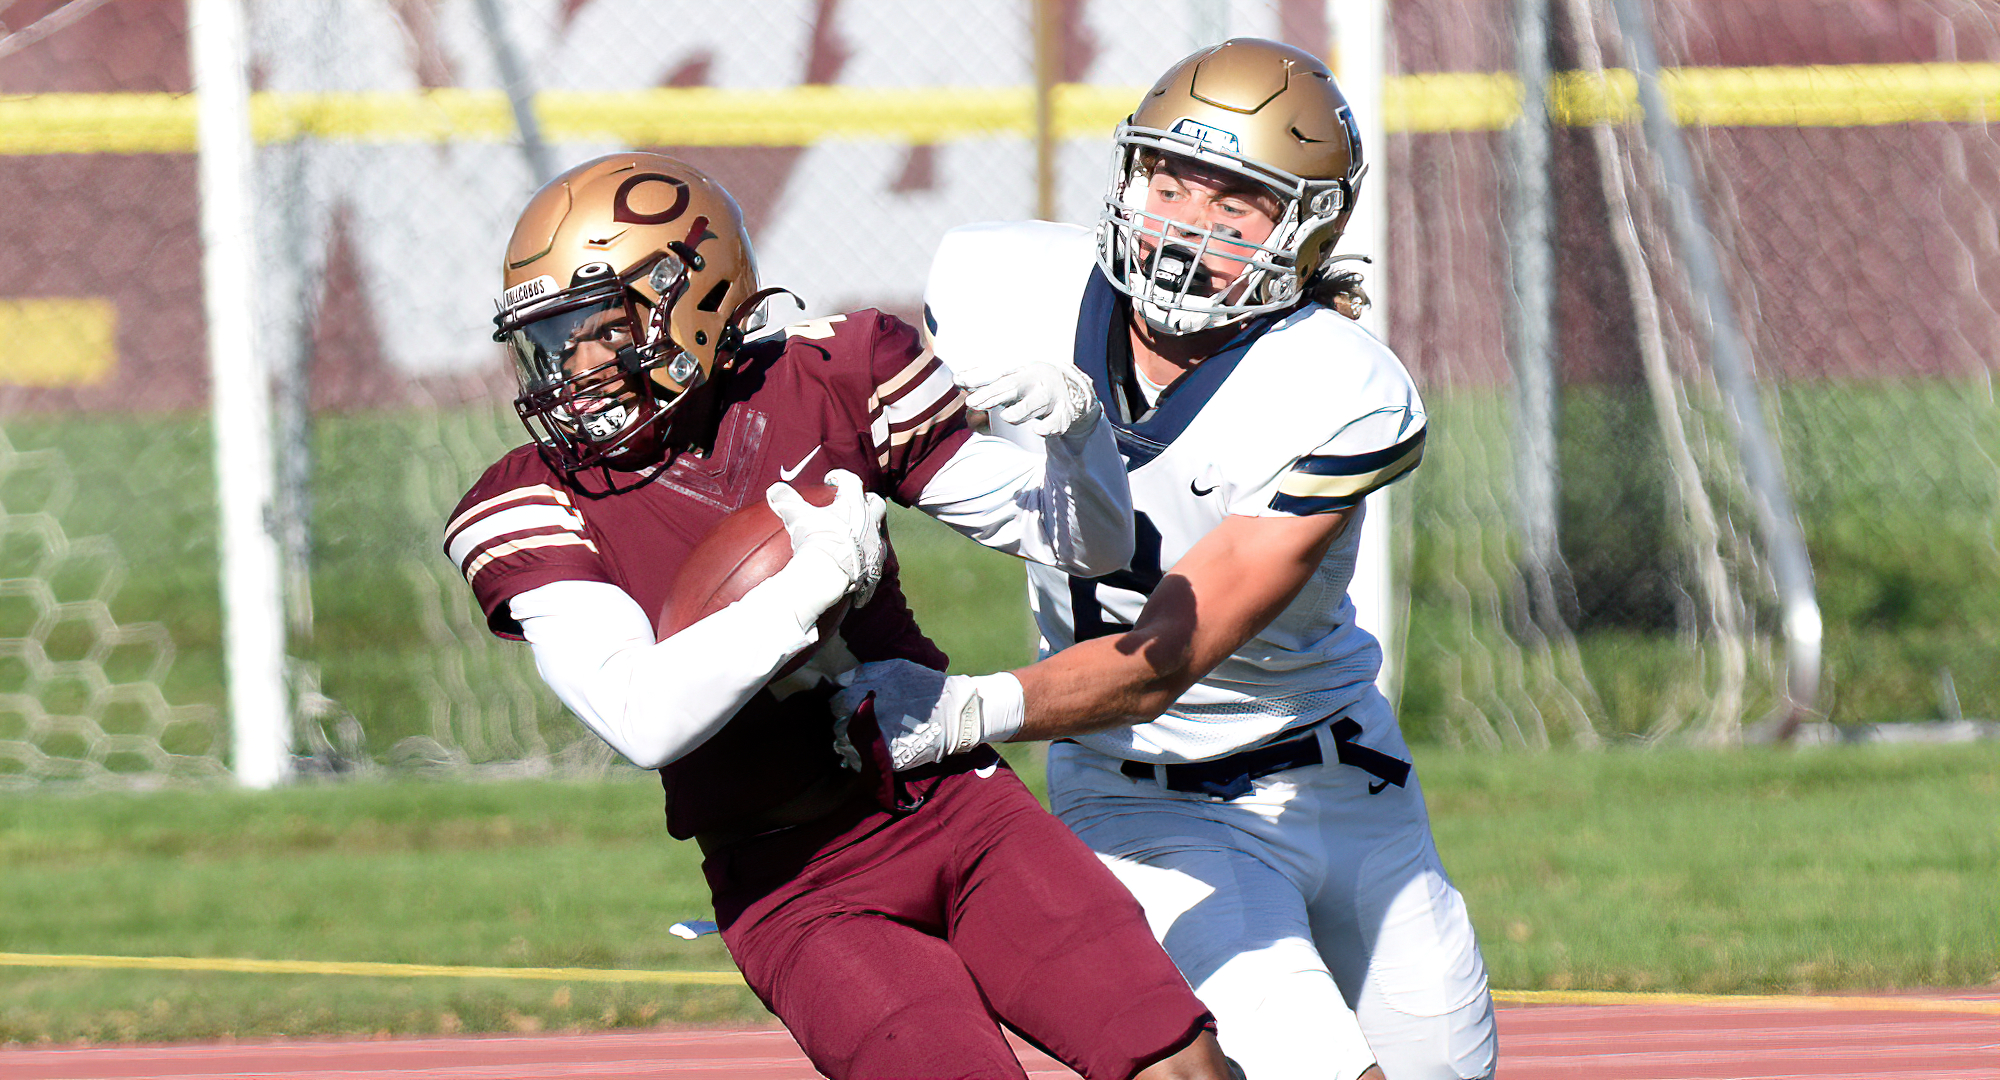 Senior Noble Scott steps in front of a Bethel receiver to make a TD-saving interception during the fourth quarter of the Cobbers' game with BU.